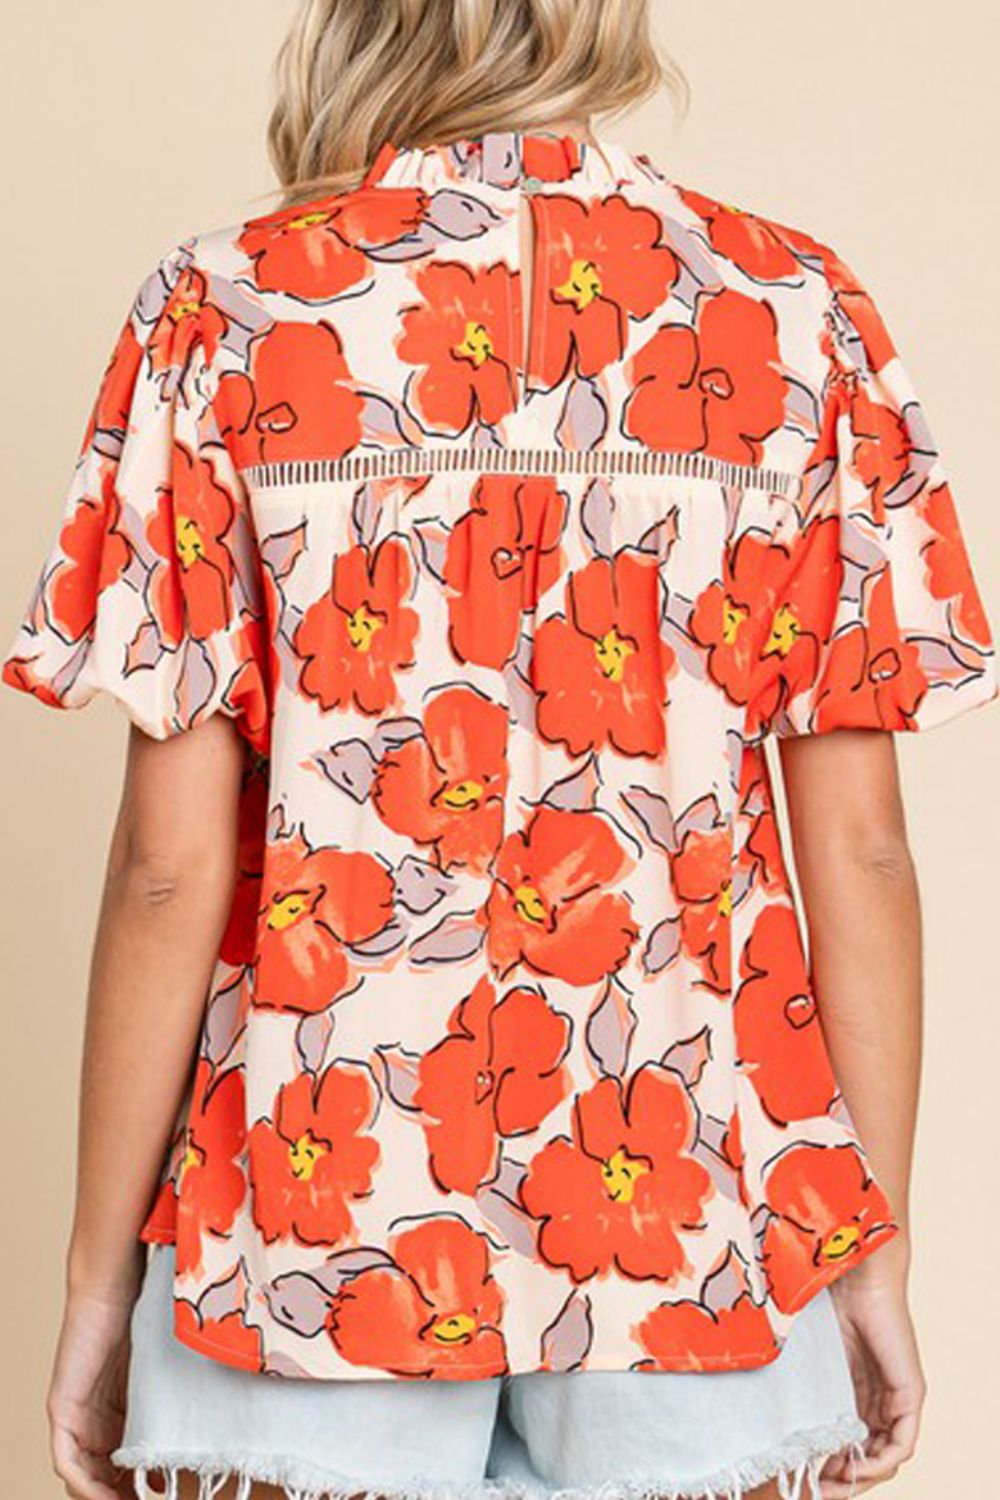 Fashionable Poppy Flower Printed Short Sleeve Blouse with Round Neck